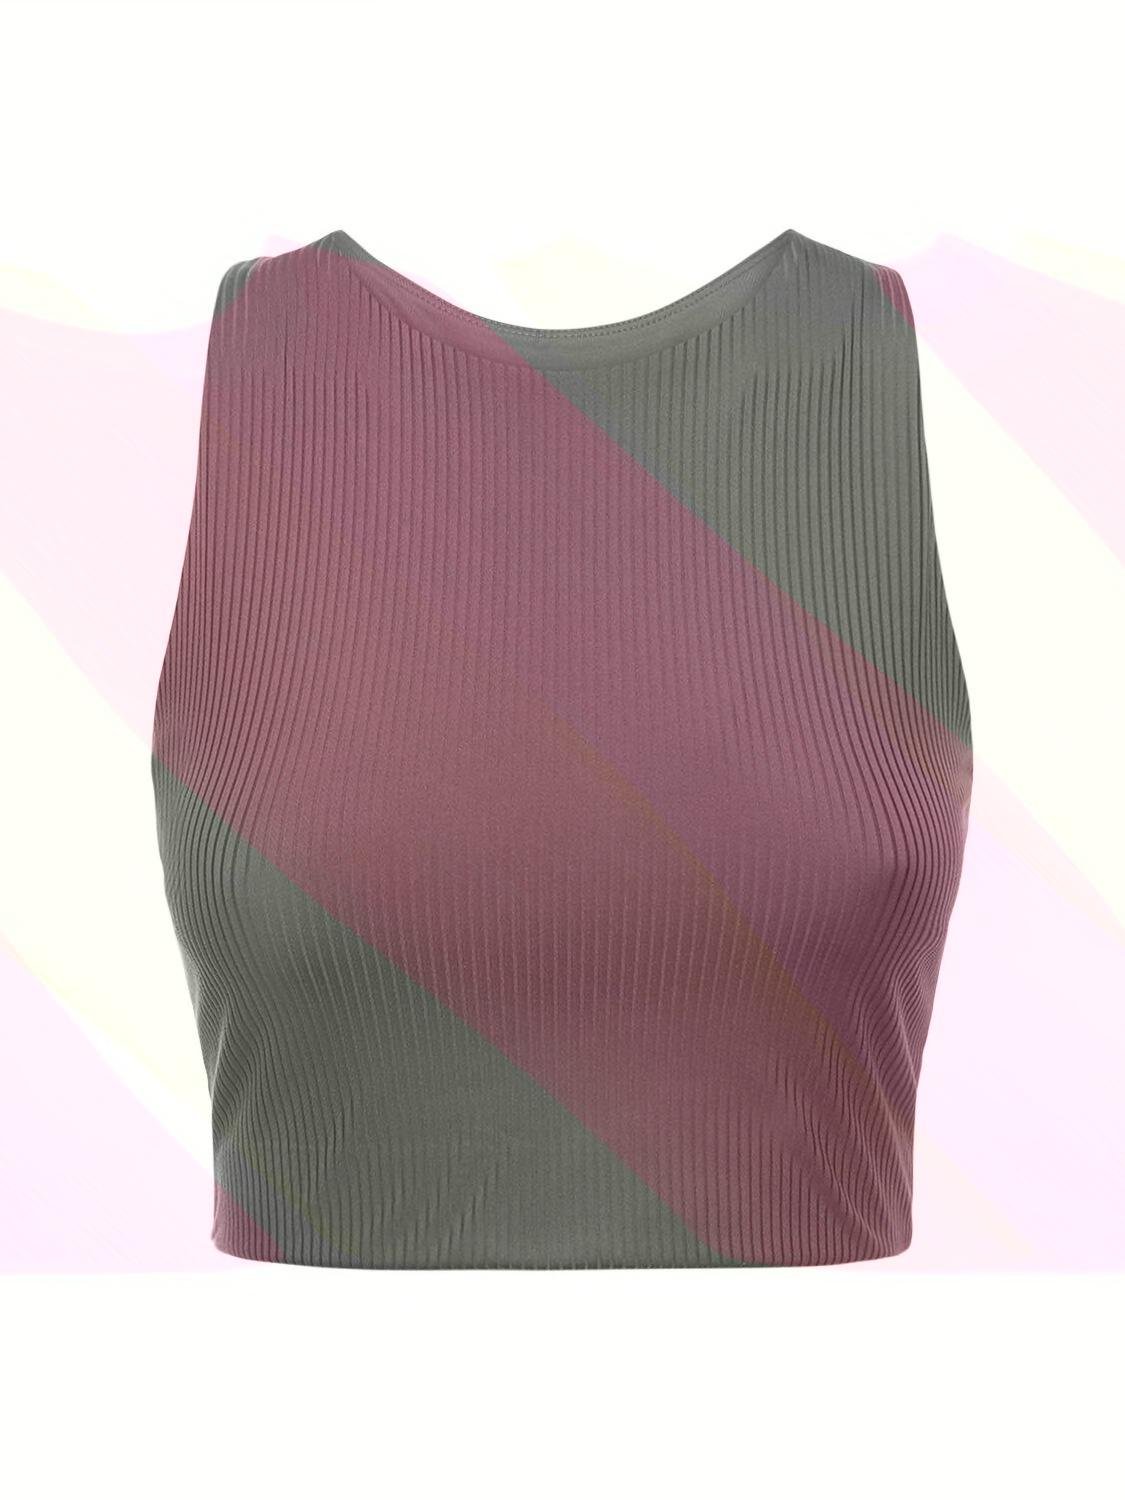 Dylan Ribbed Stretch Tech Bra Top by GIRLFRIEND COLLECTIVE